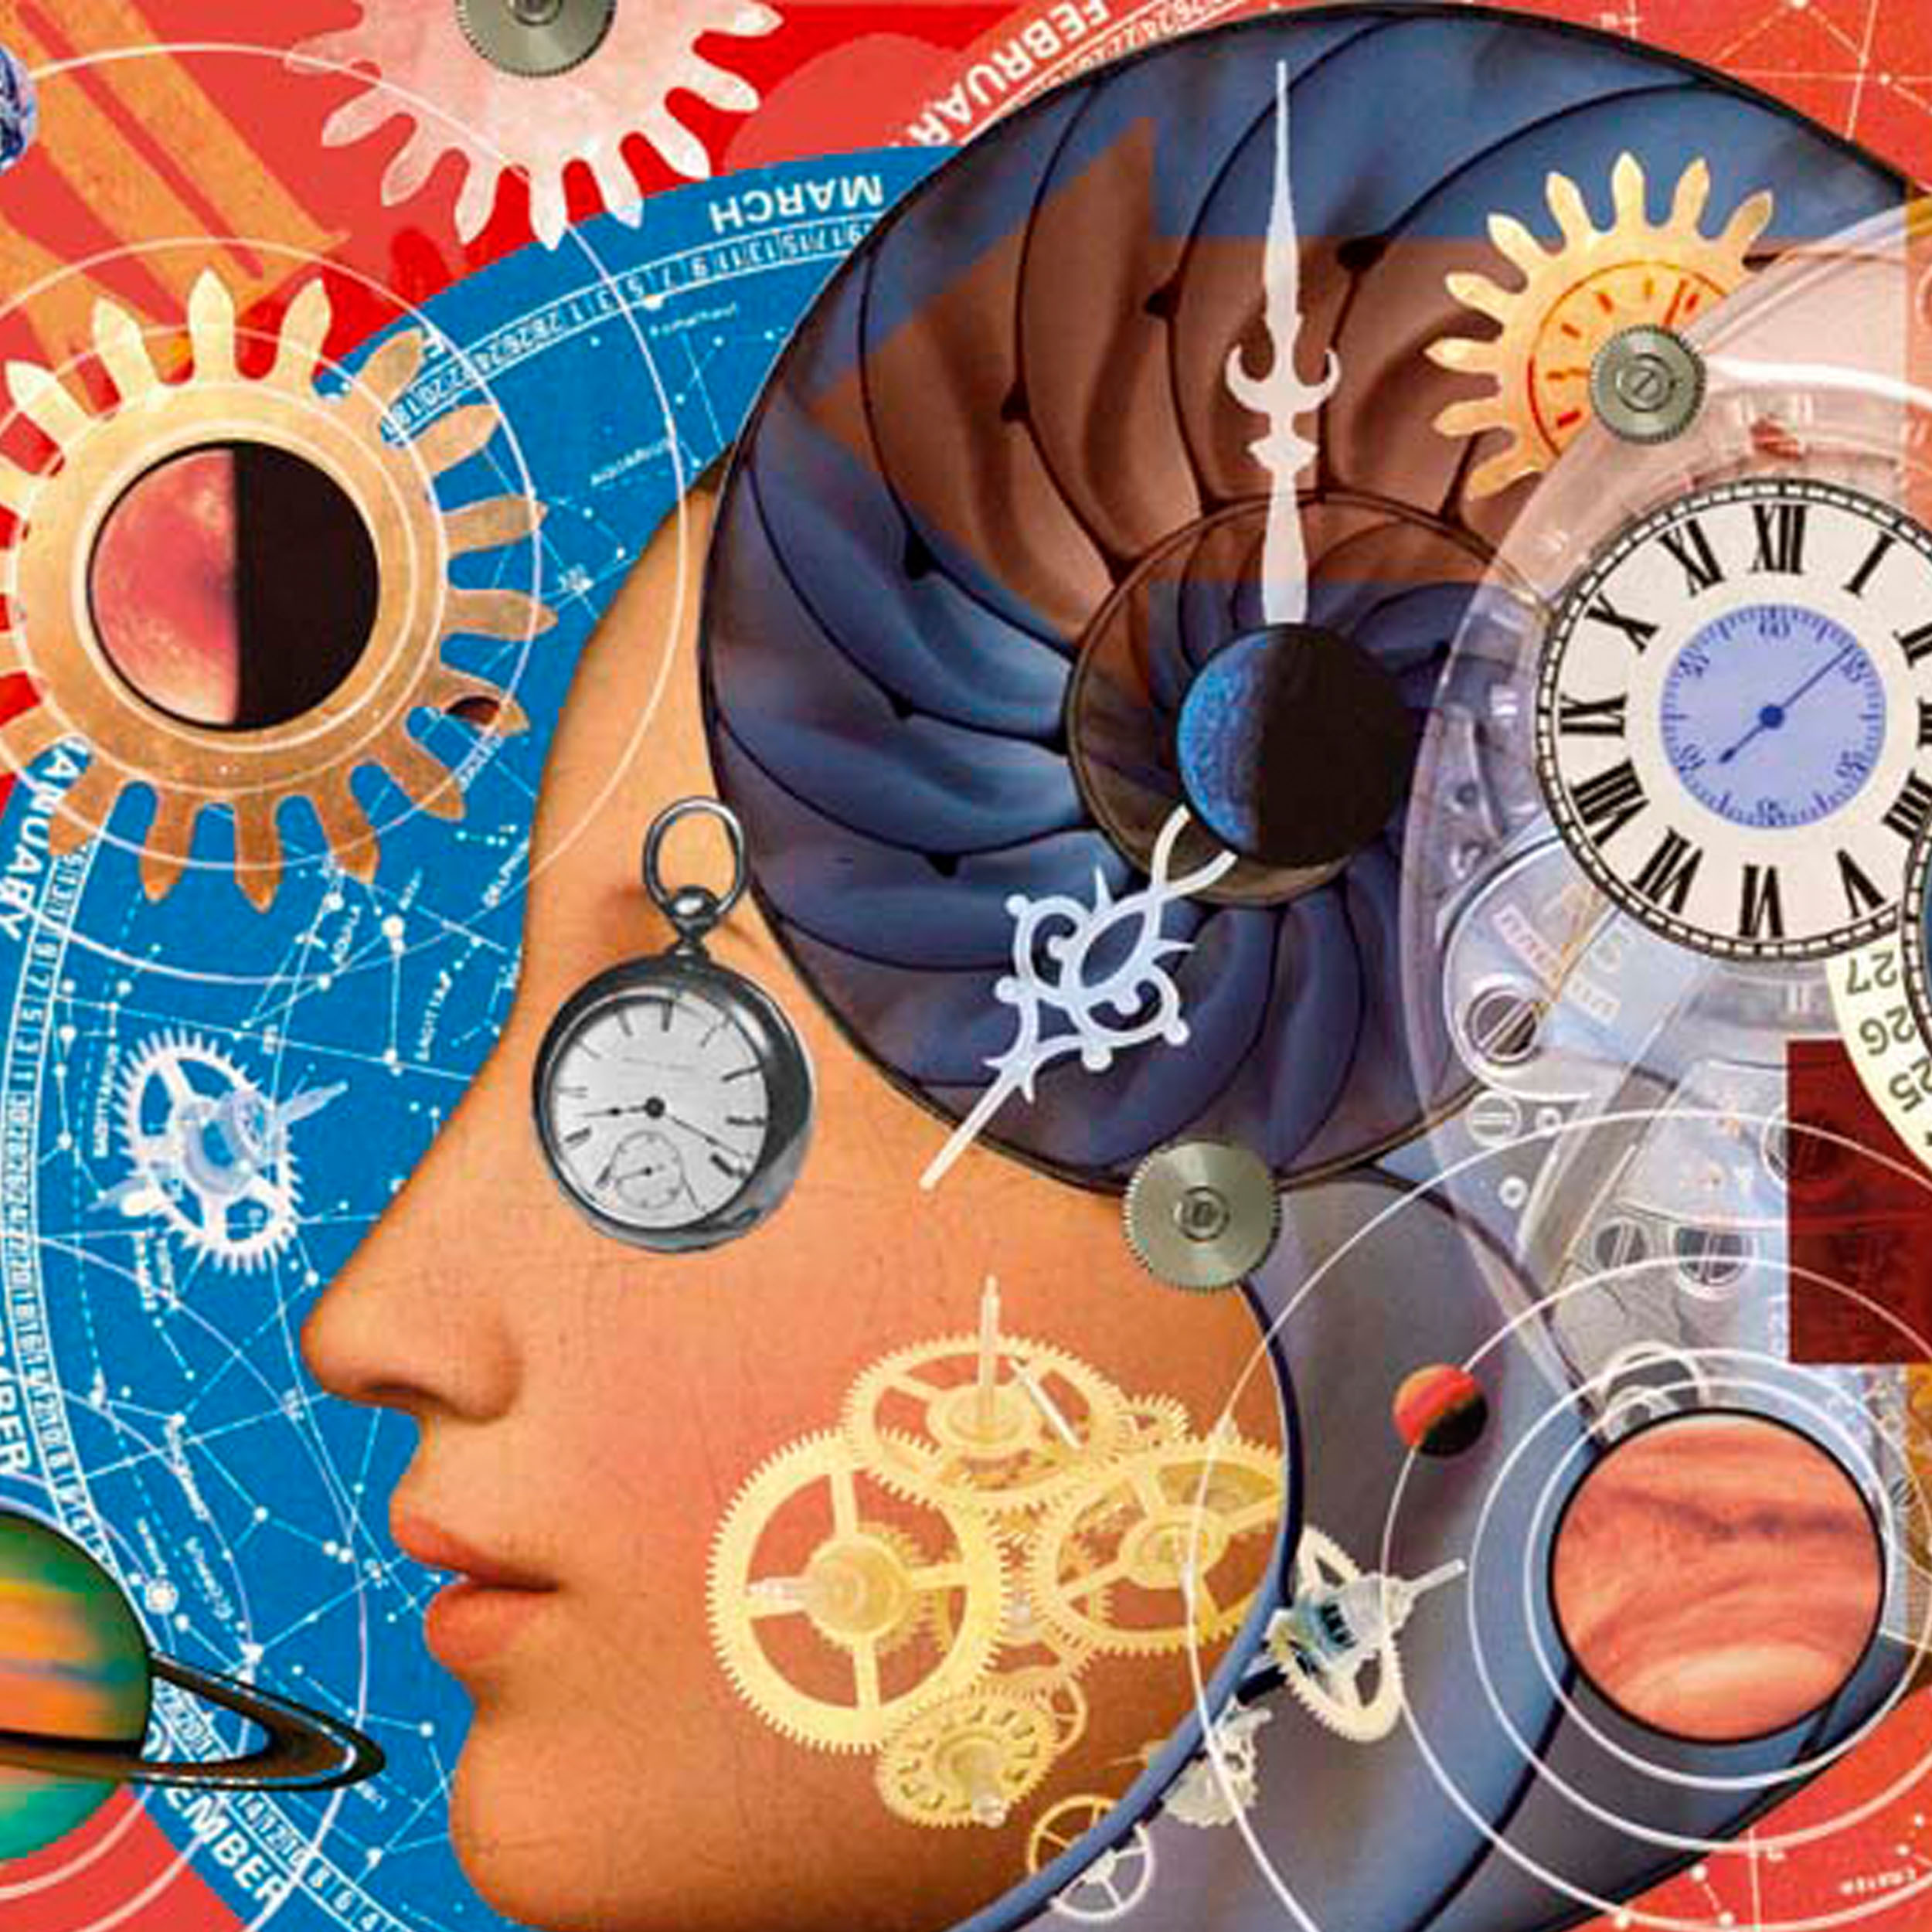 Collage illustration of time featuring clocks, watches, stars, planets, universe, clock parts, cogs, gears and springs. 